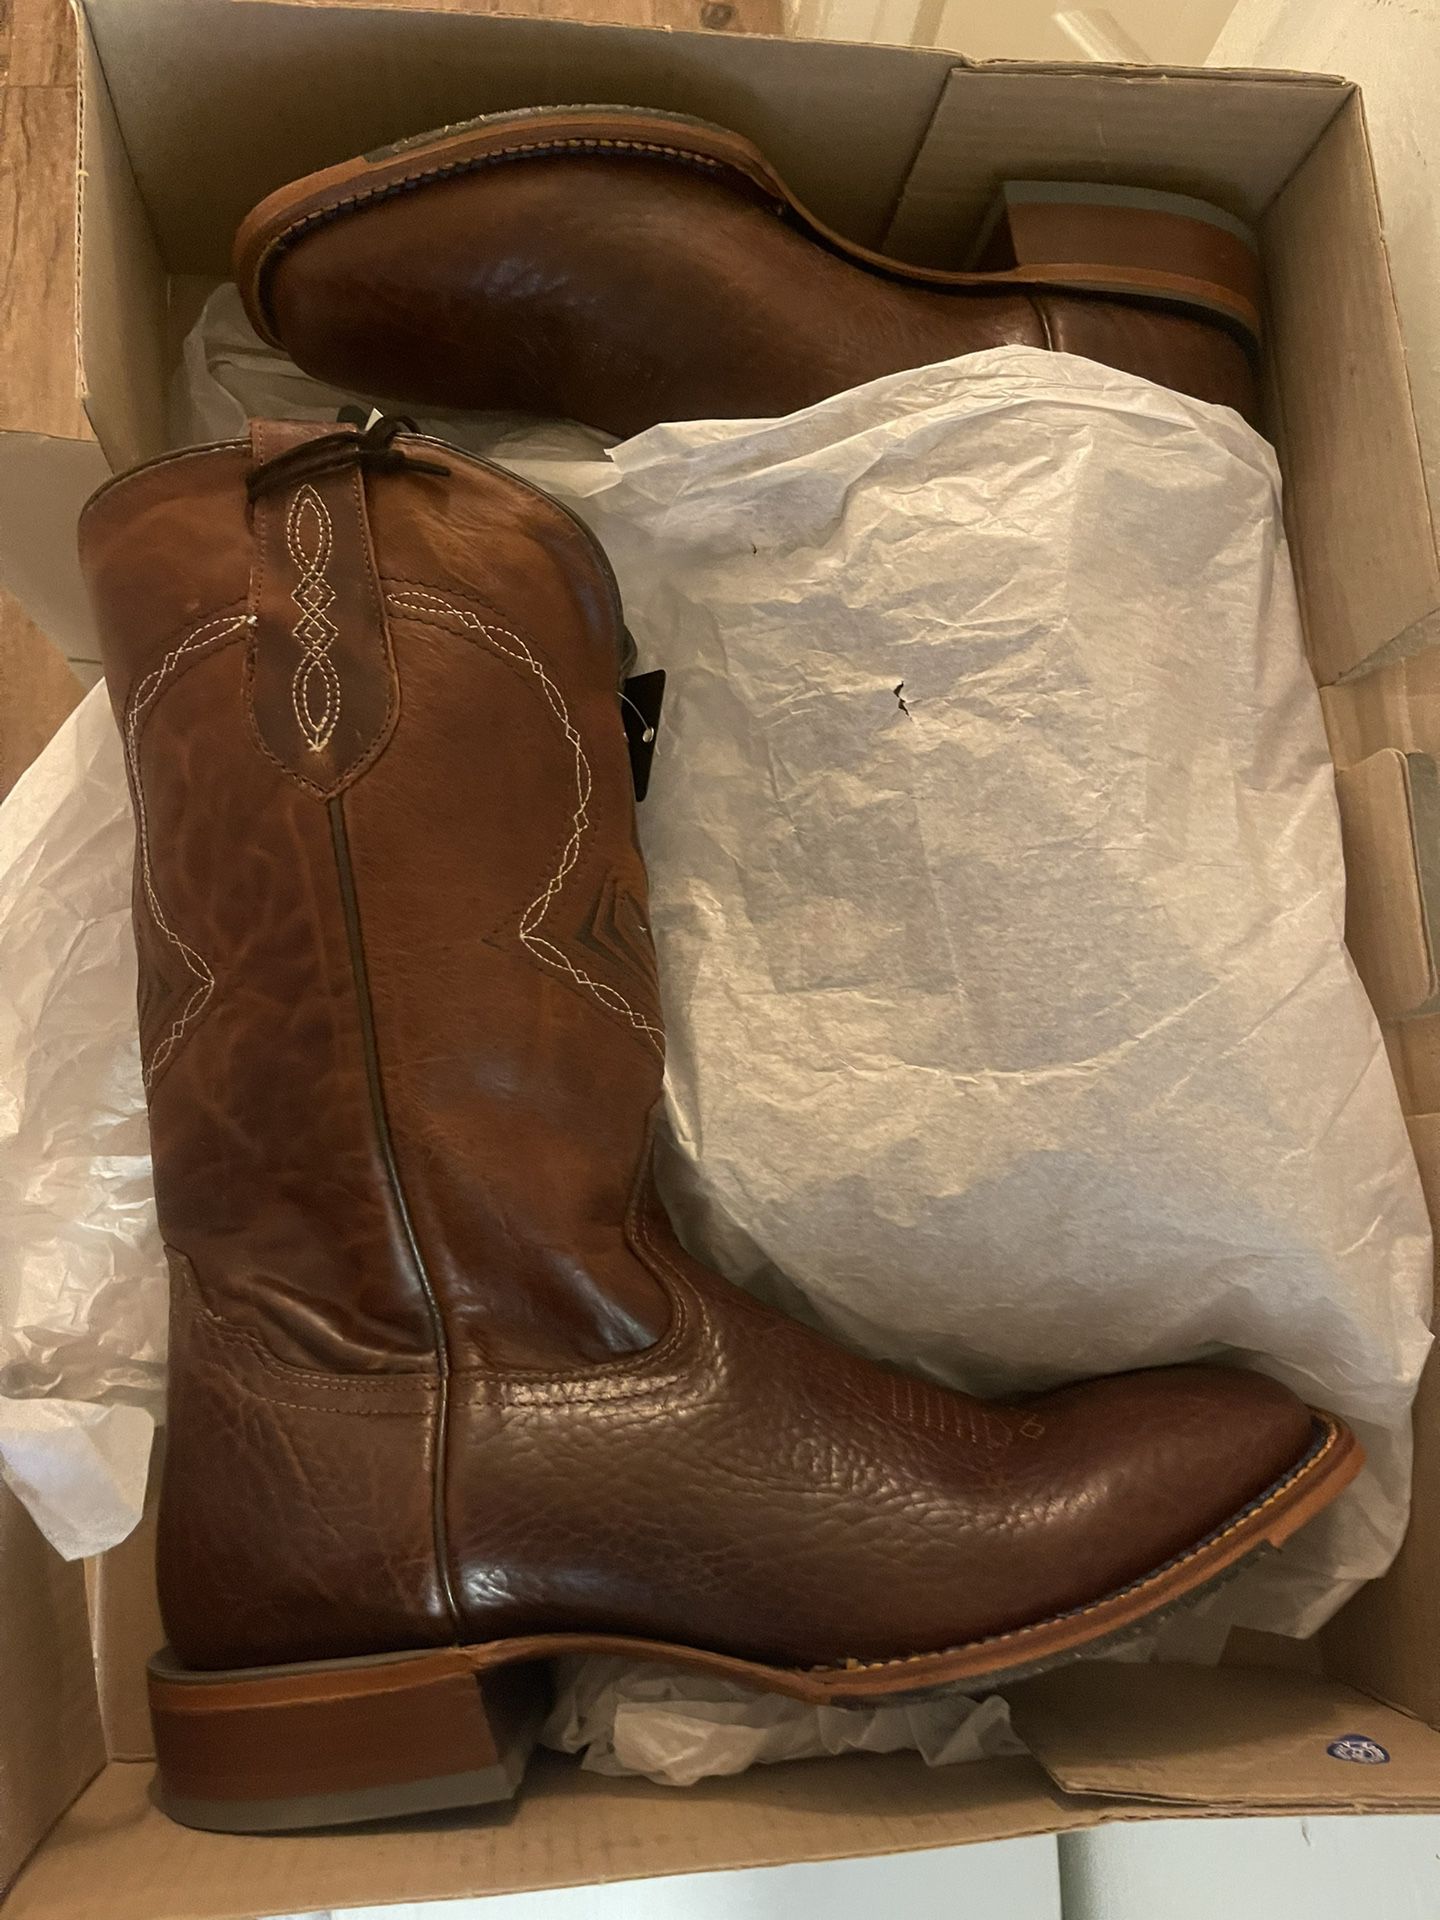 Boot Barn Boots Black Pair And Brown Pair Each Separate for Sale in  Bakersfield, CA - OfferUp